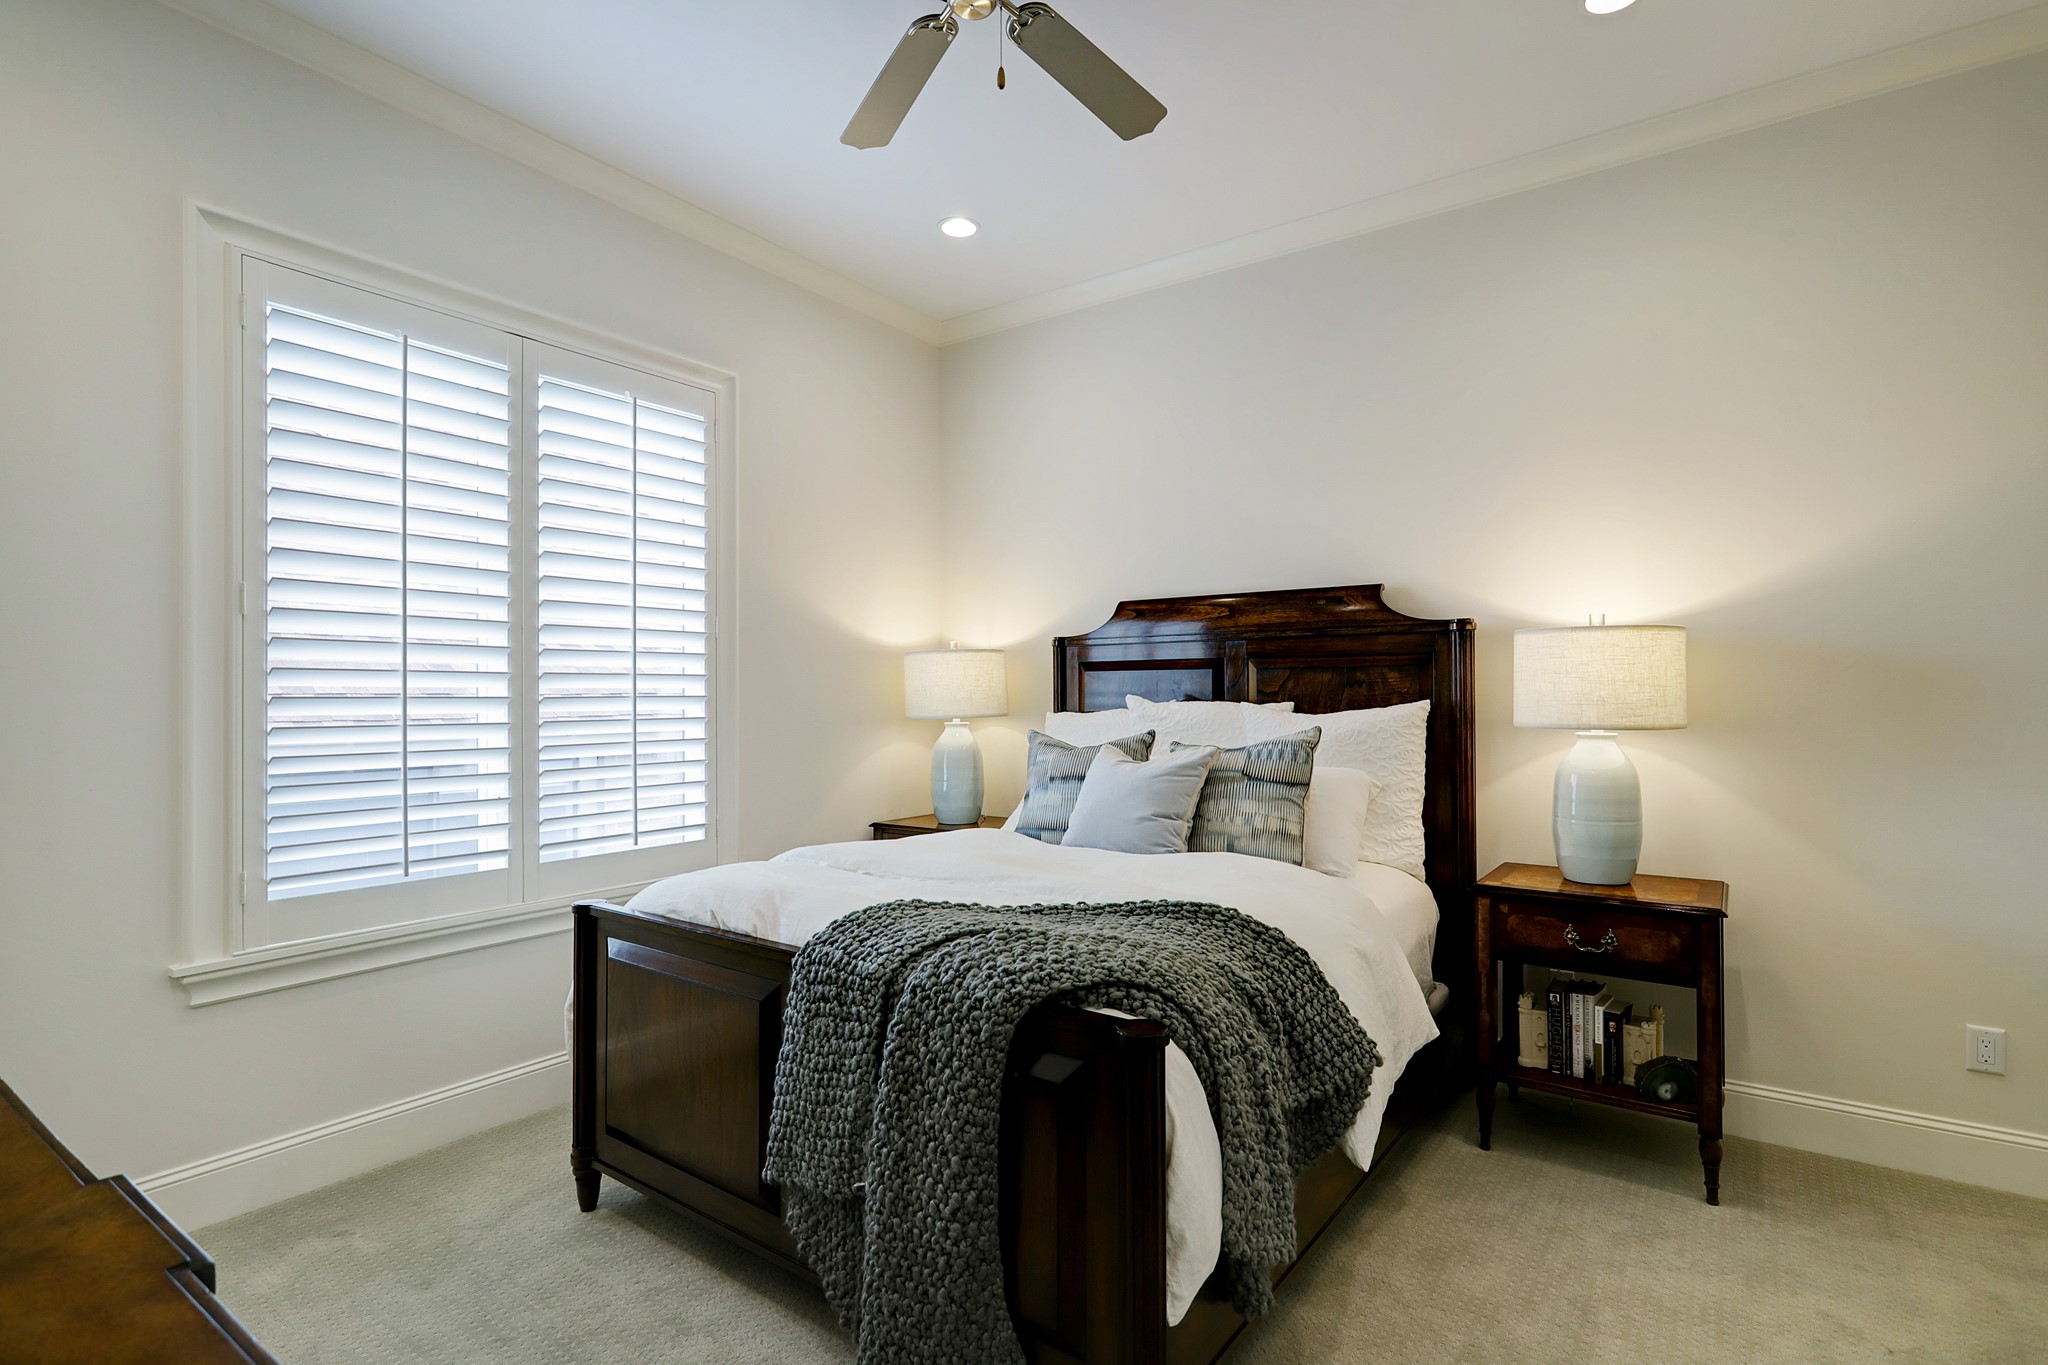 secondary bedroom with ensuite bath, crown molding and nice closet space.